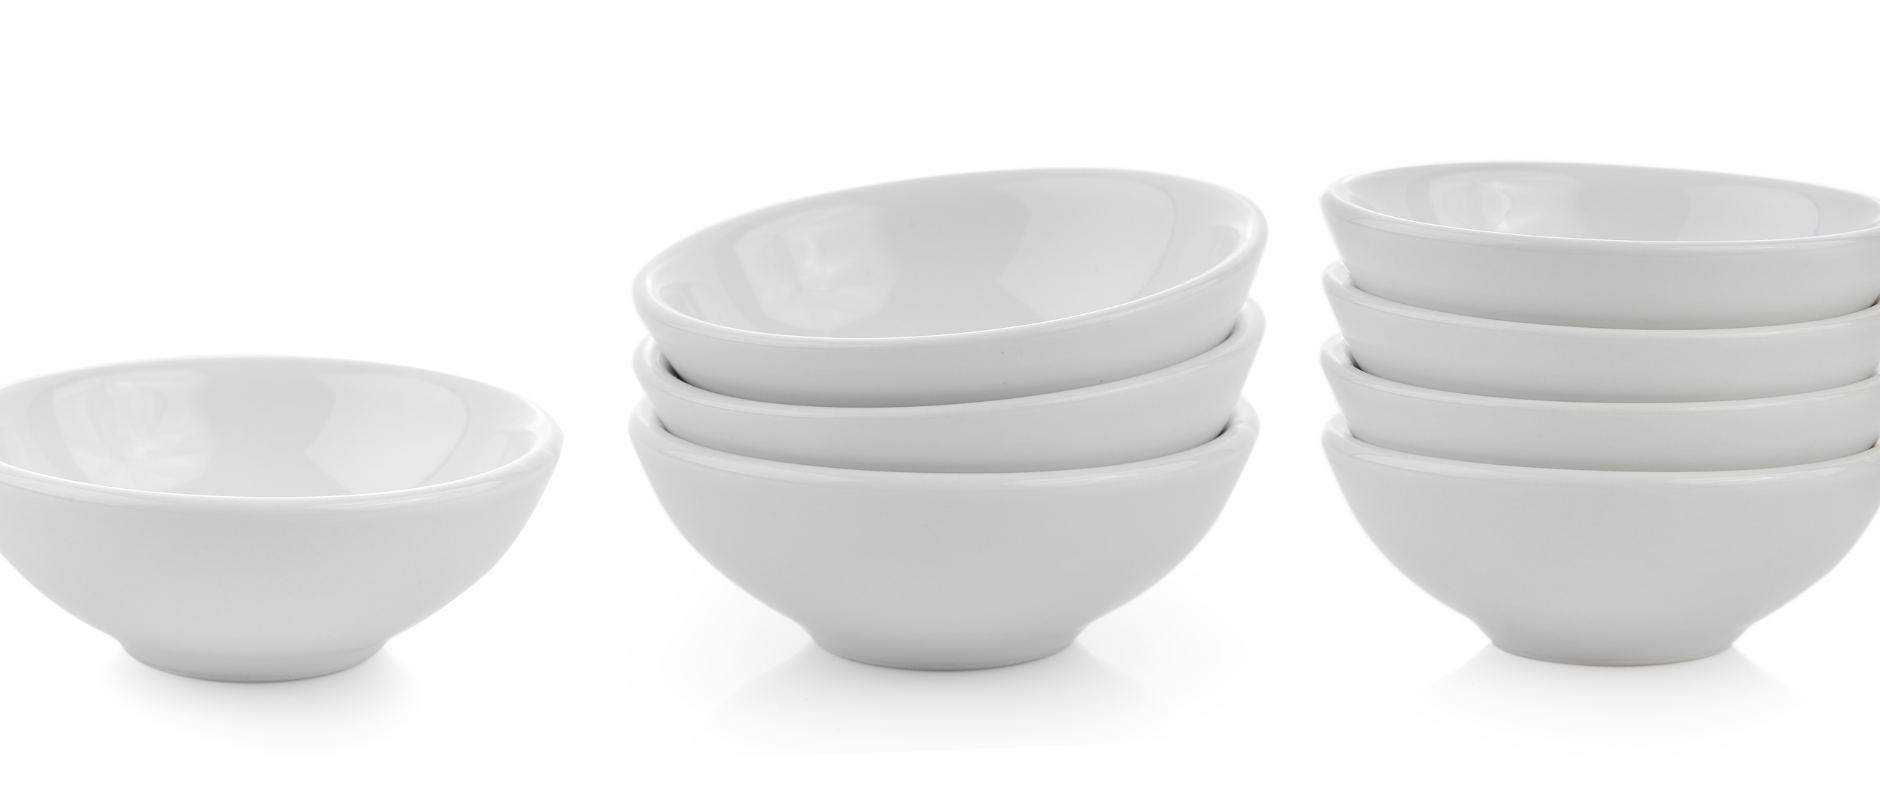 white bowls. one bowl by itself and the other bowls are stacked on top of one another. 